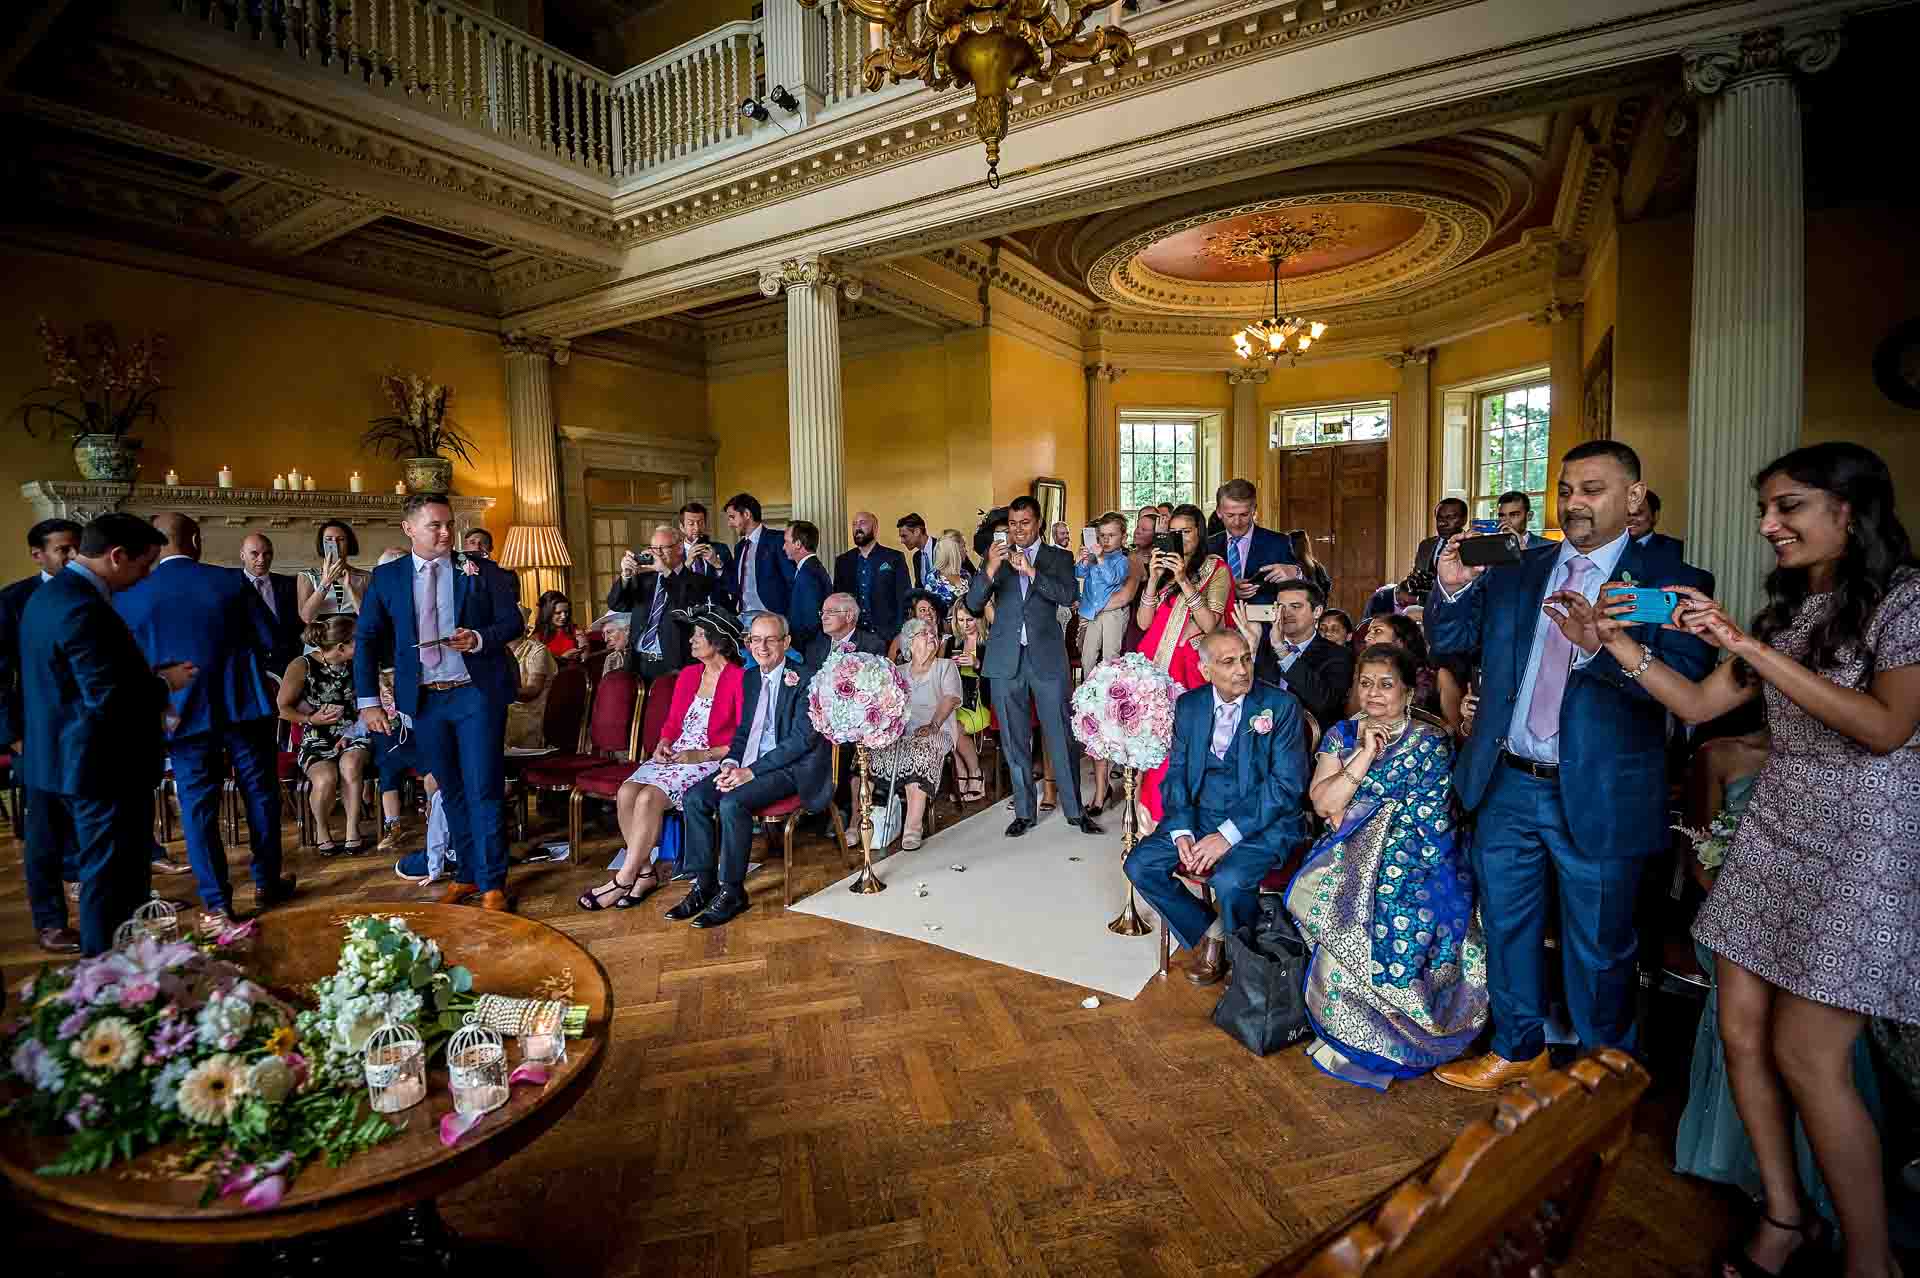 The guests take photos of the couple after their ceremony at Hampton Court House